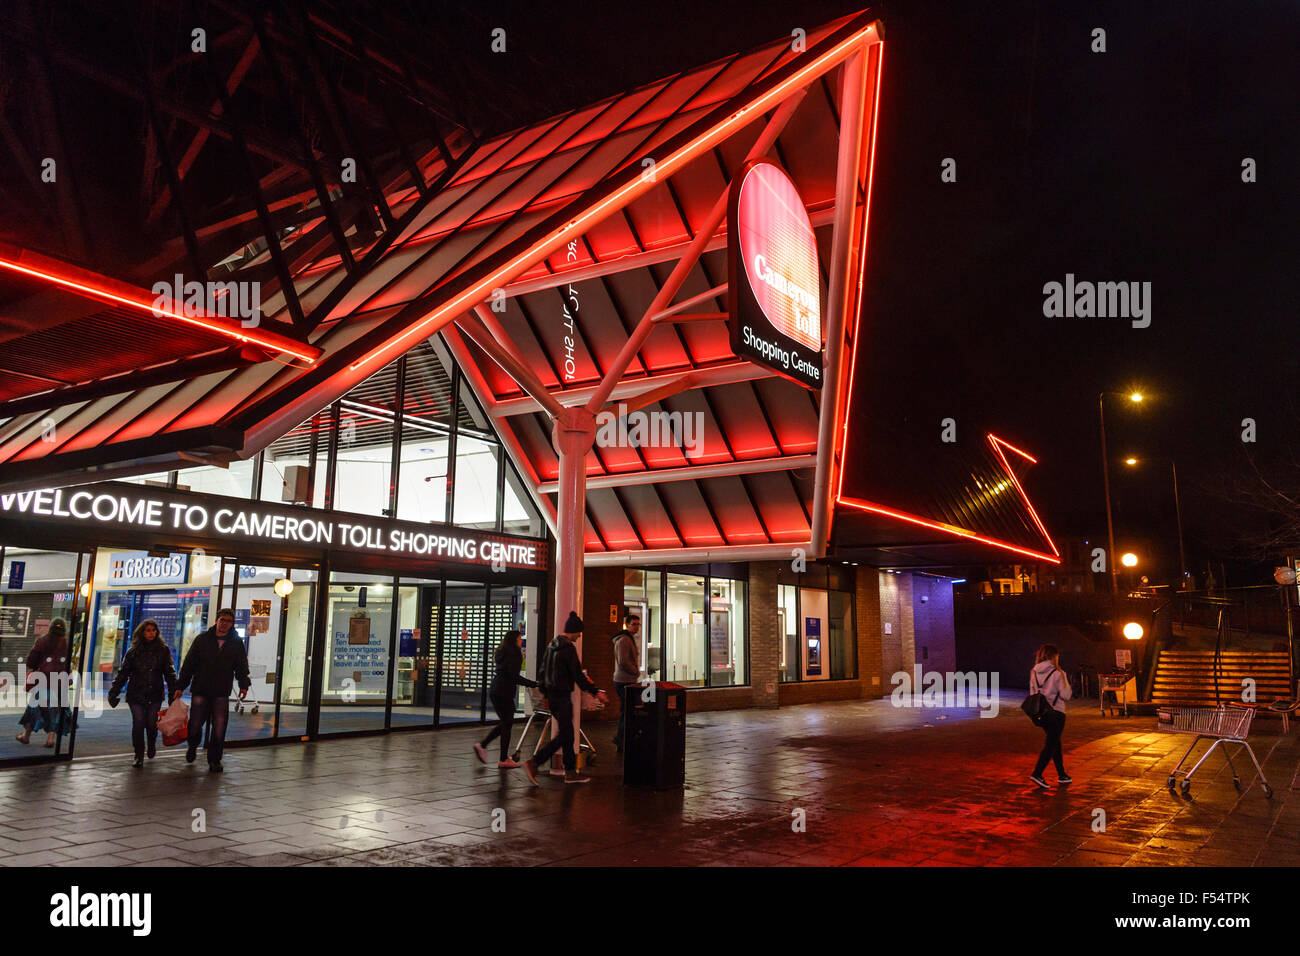 Cameron Toll shopping centre, Edinburgh, winter night - glass canopy protects shoppers from rain Stock Photo